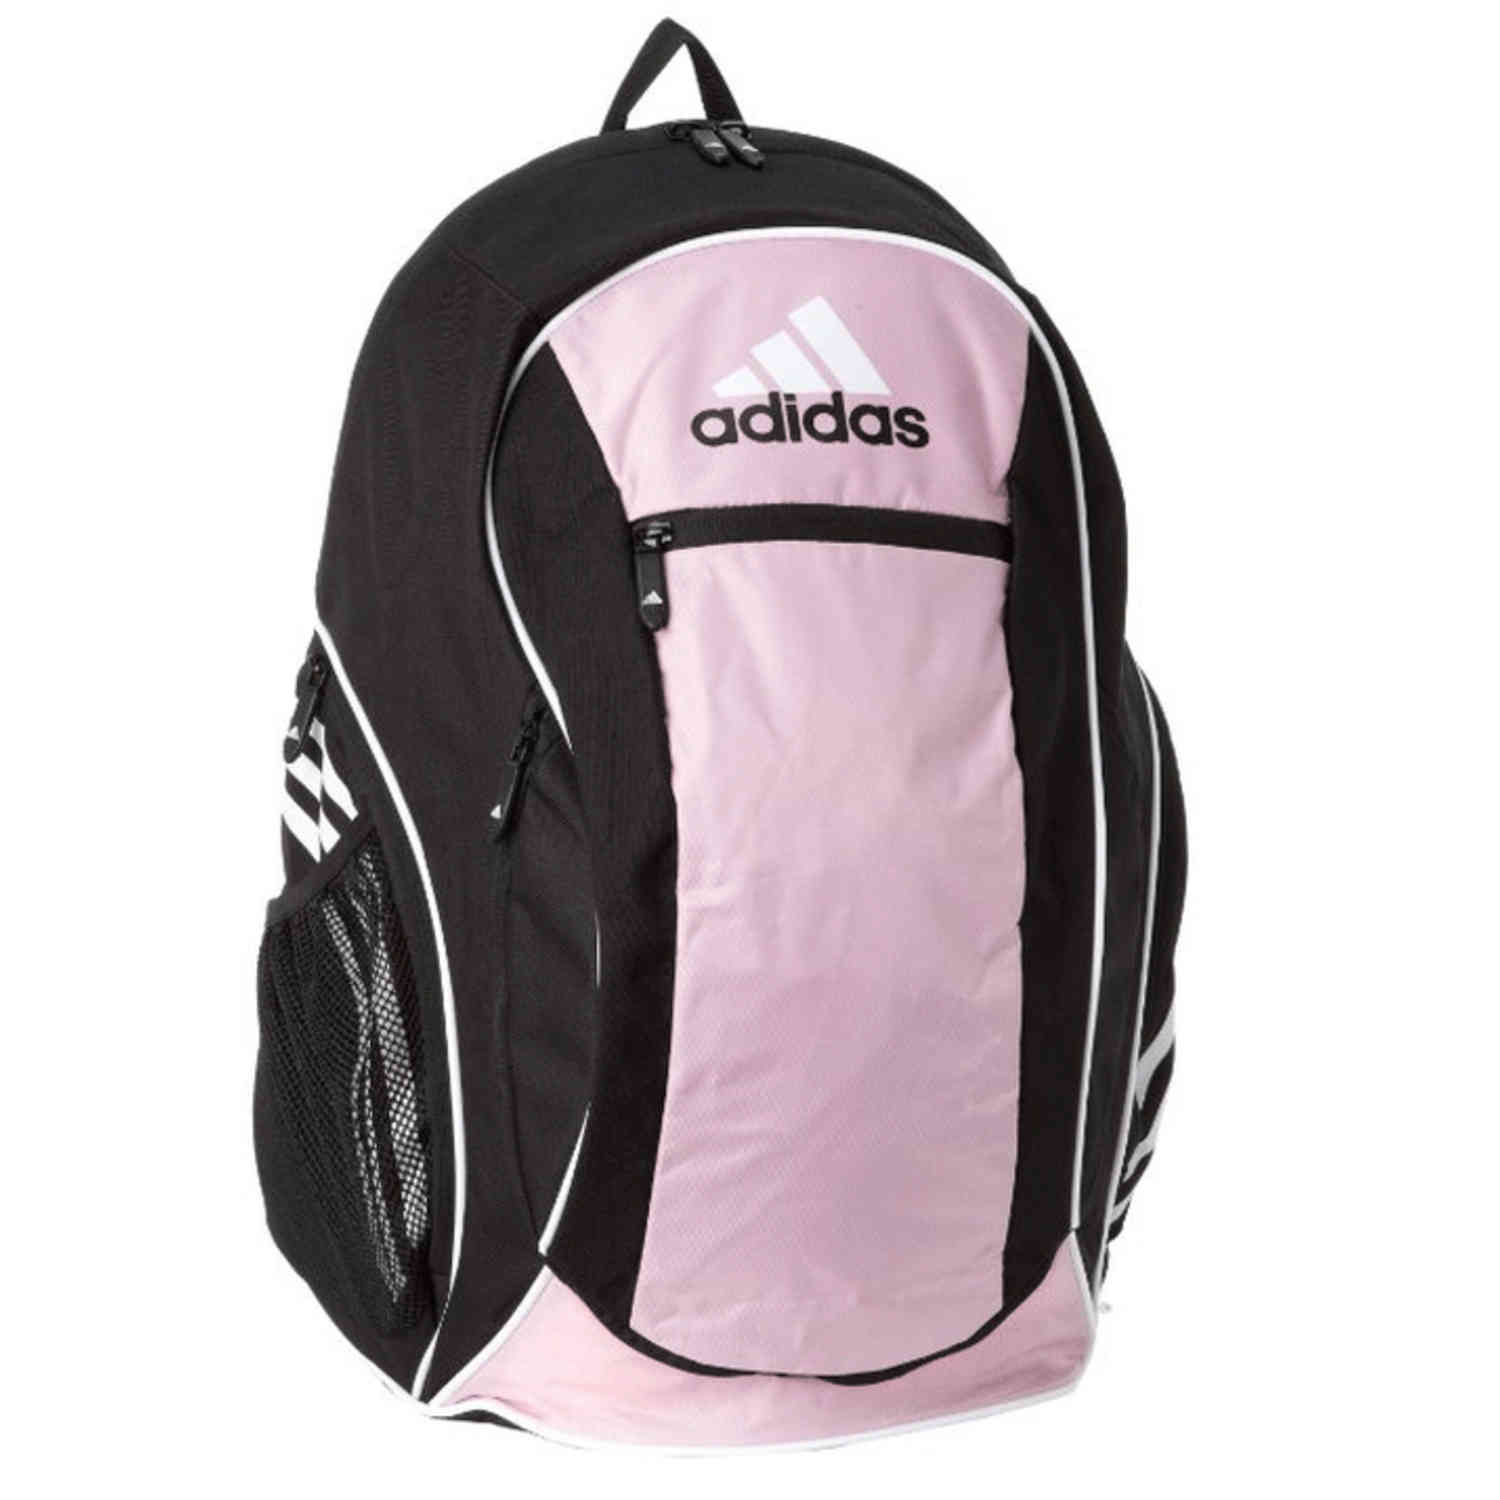 adidas soccer bags with ball holder